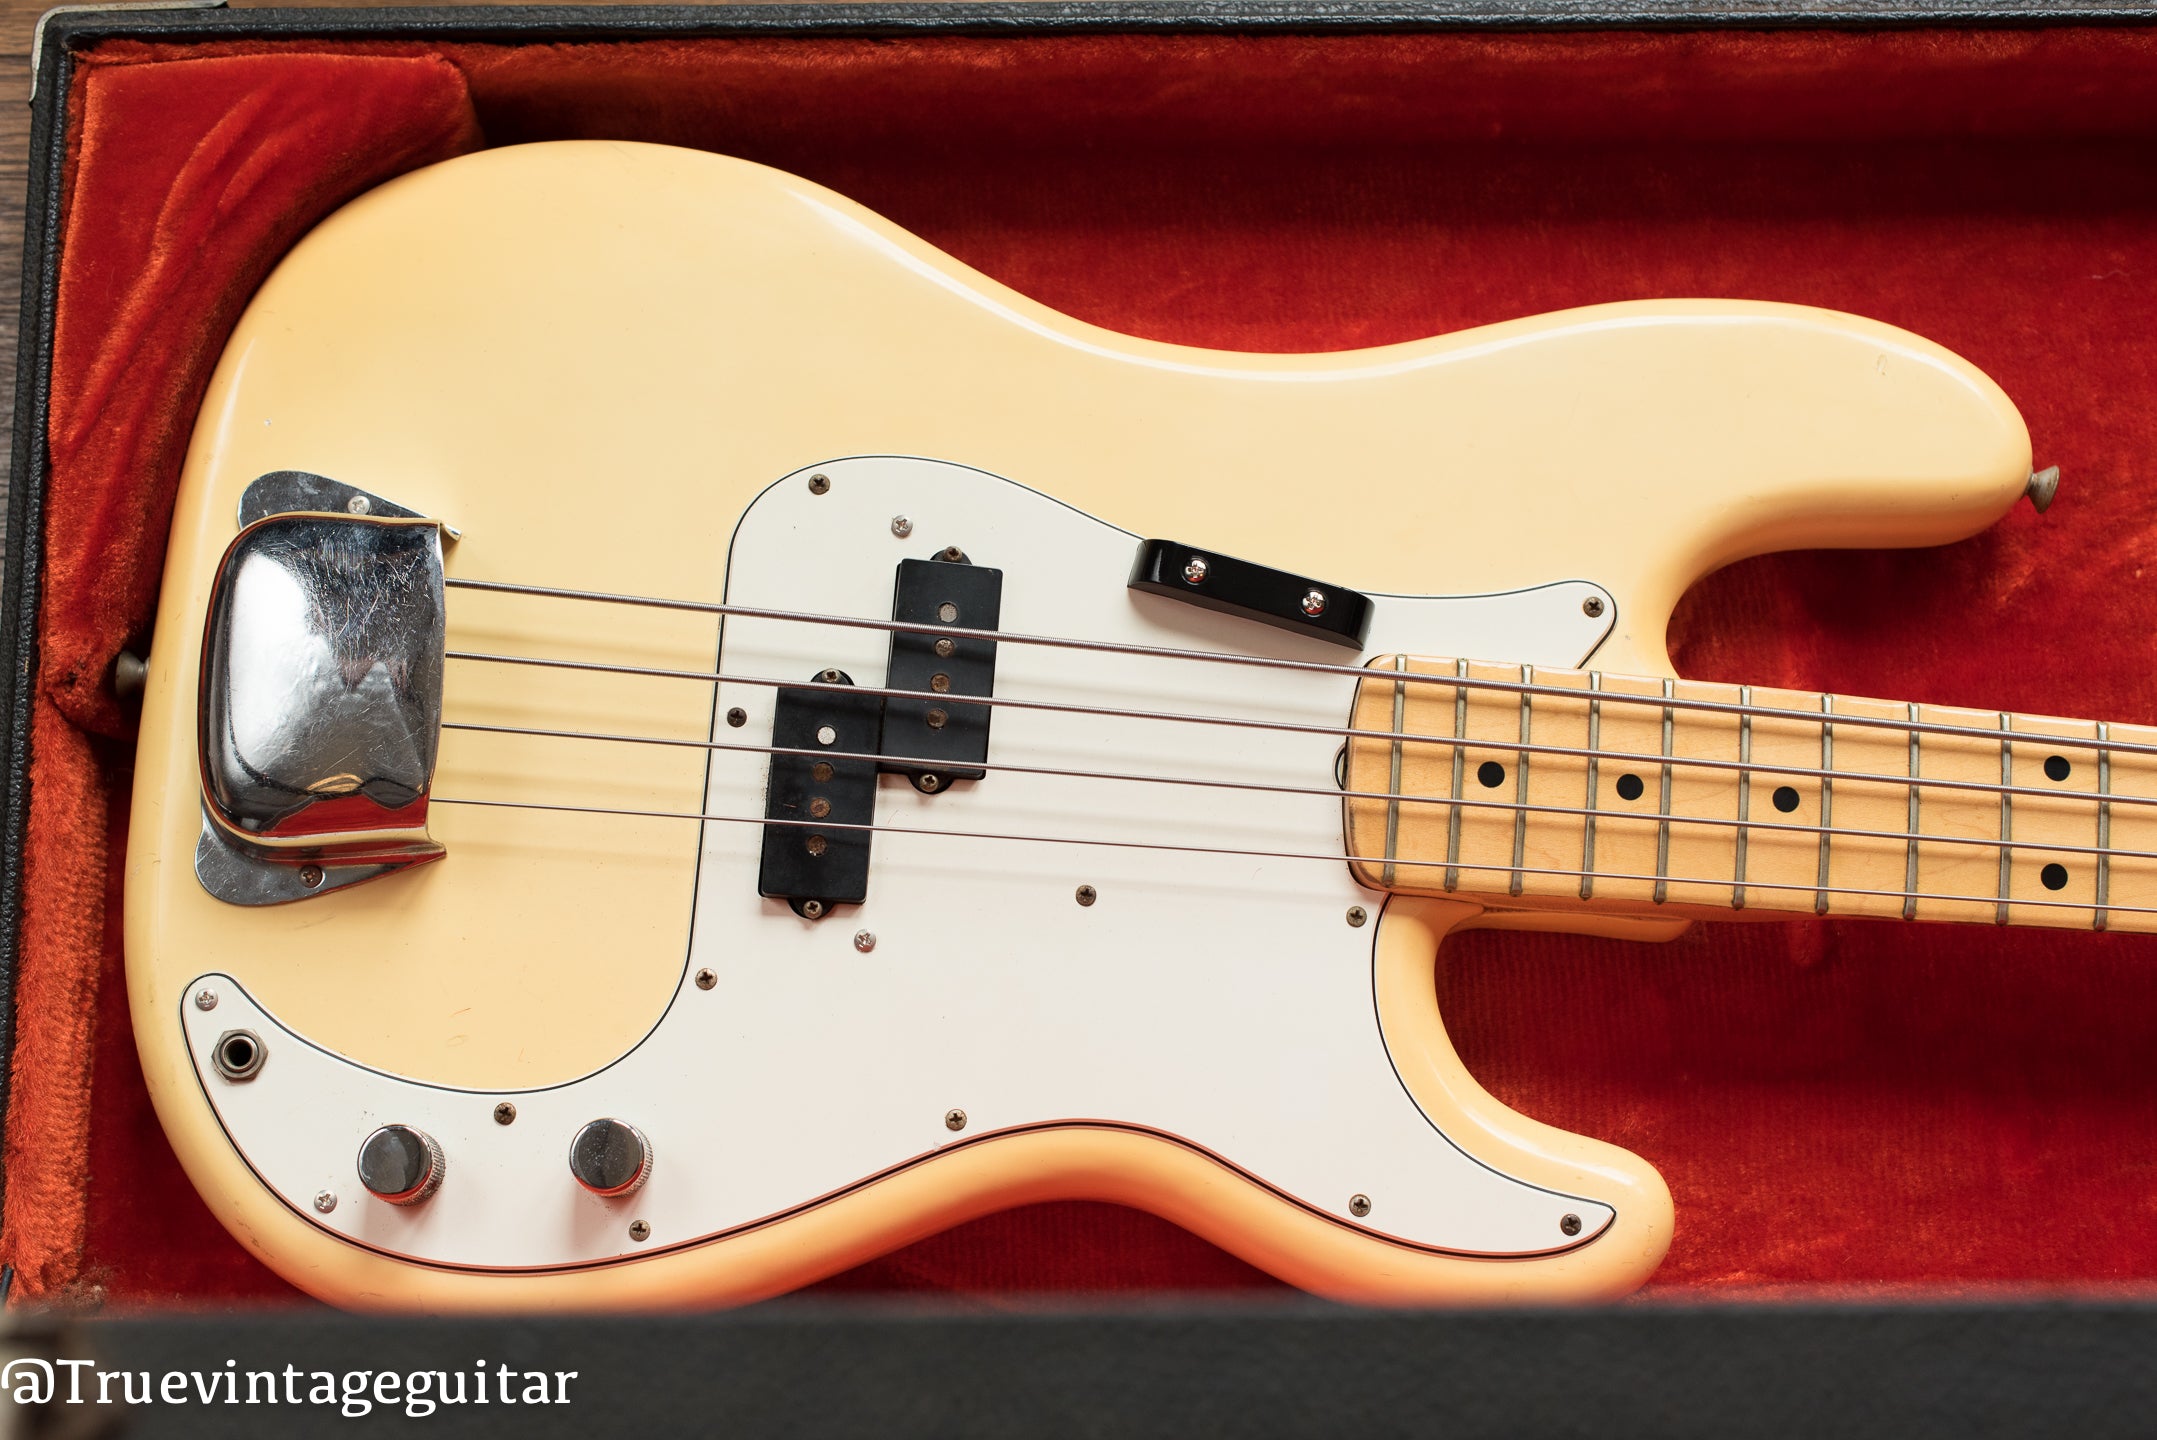 Vintage 1976 Fender Precision Bass guitar Olympic White